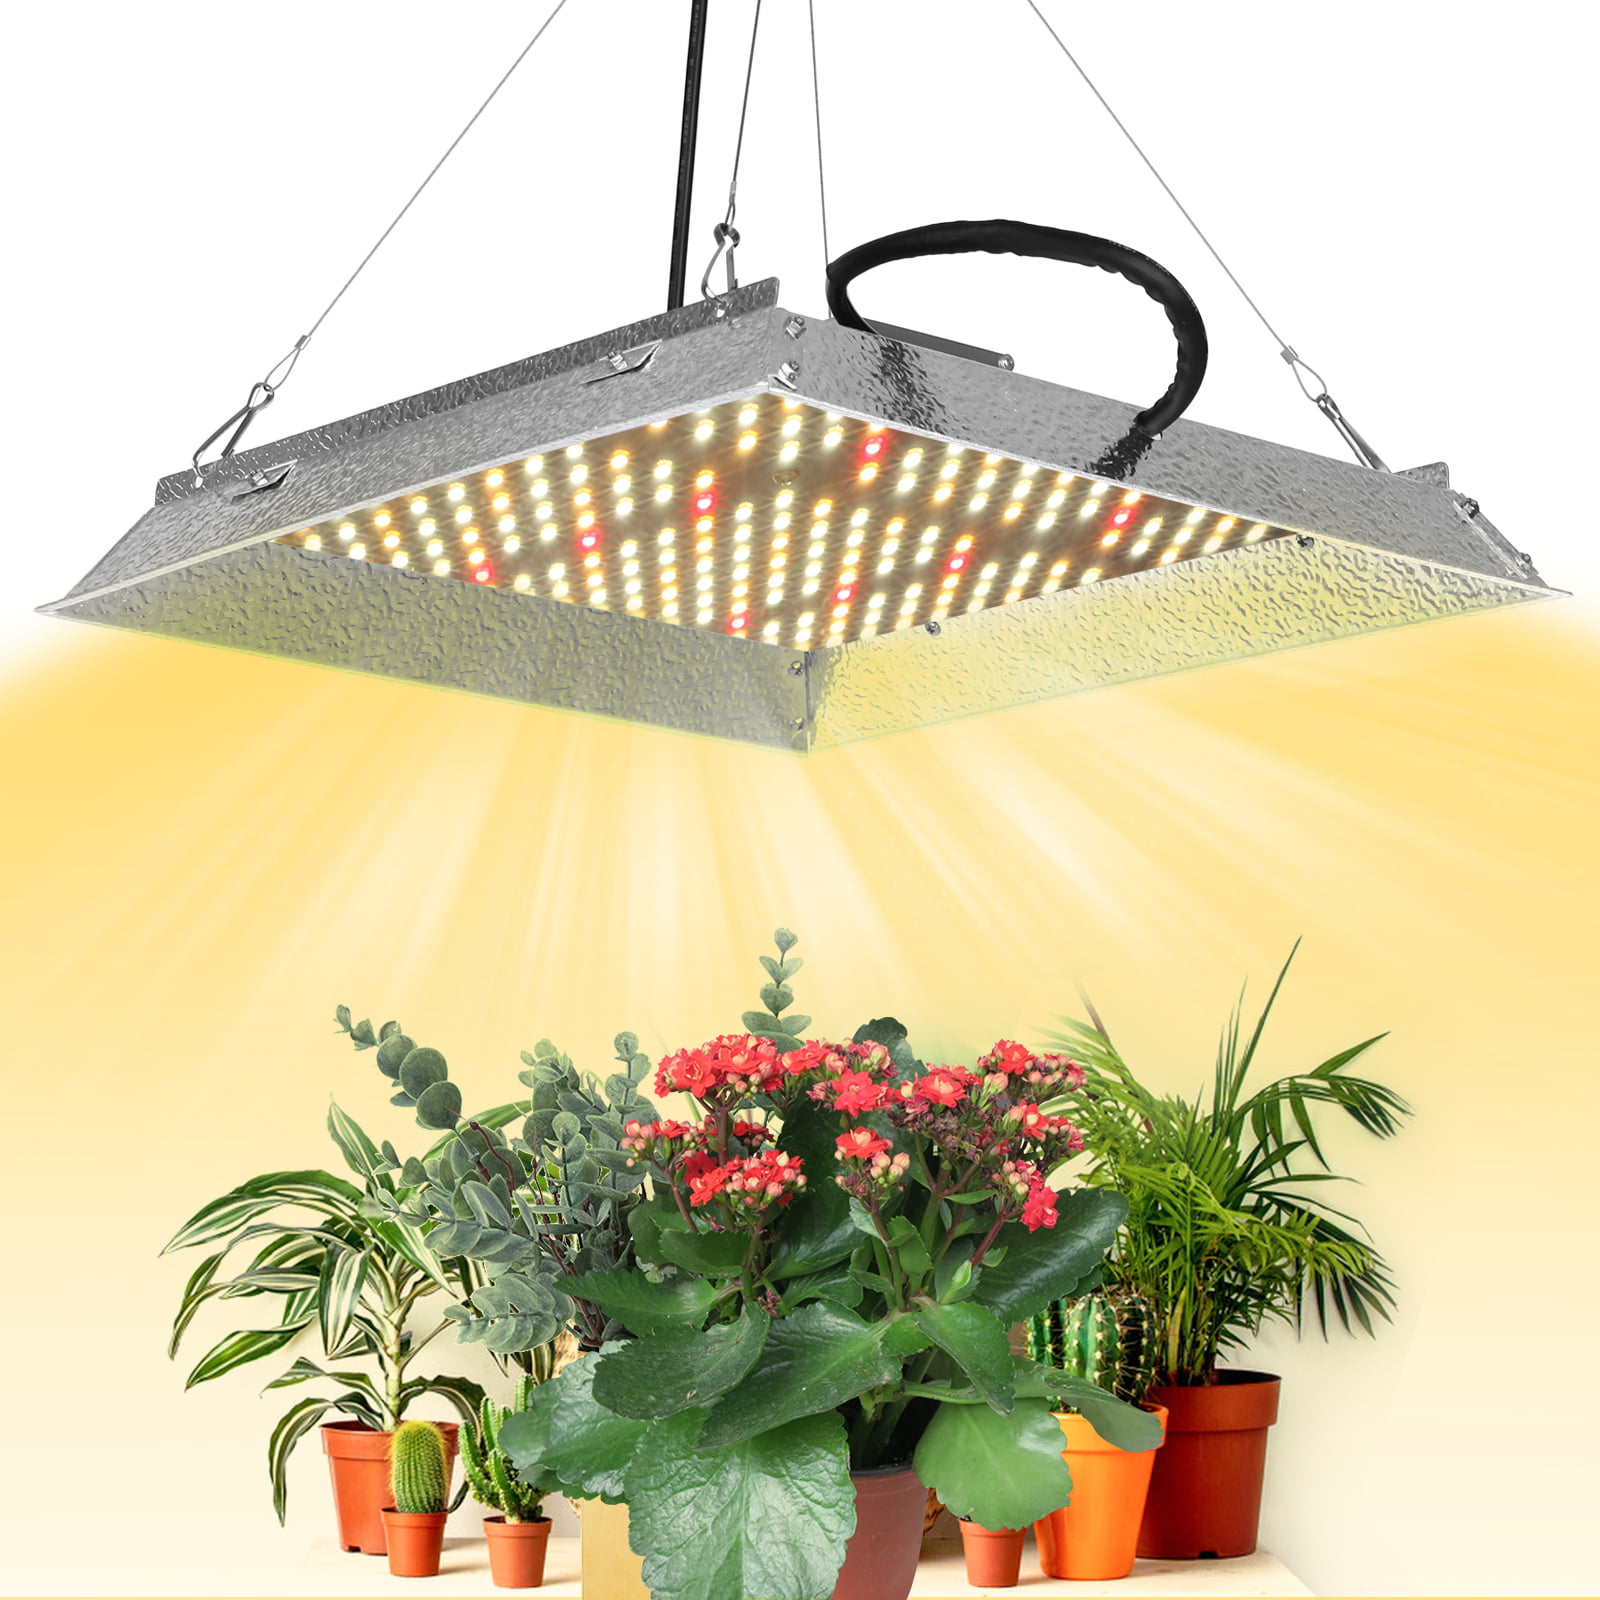 Details about   1000W LED Grow Light Full Spectrum Growing Lamps for Hydroponic Indoor White 